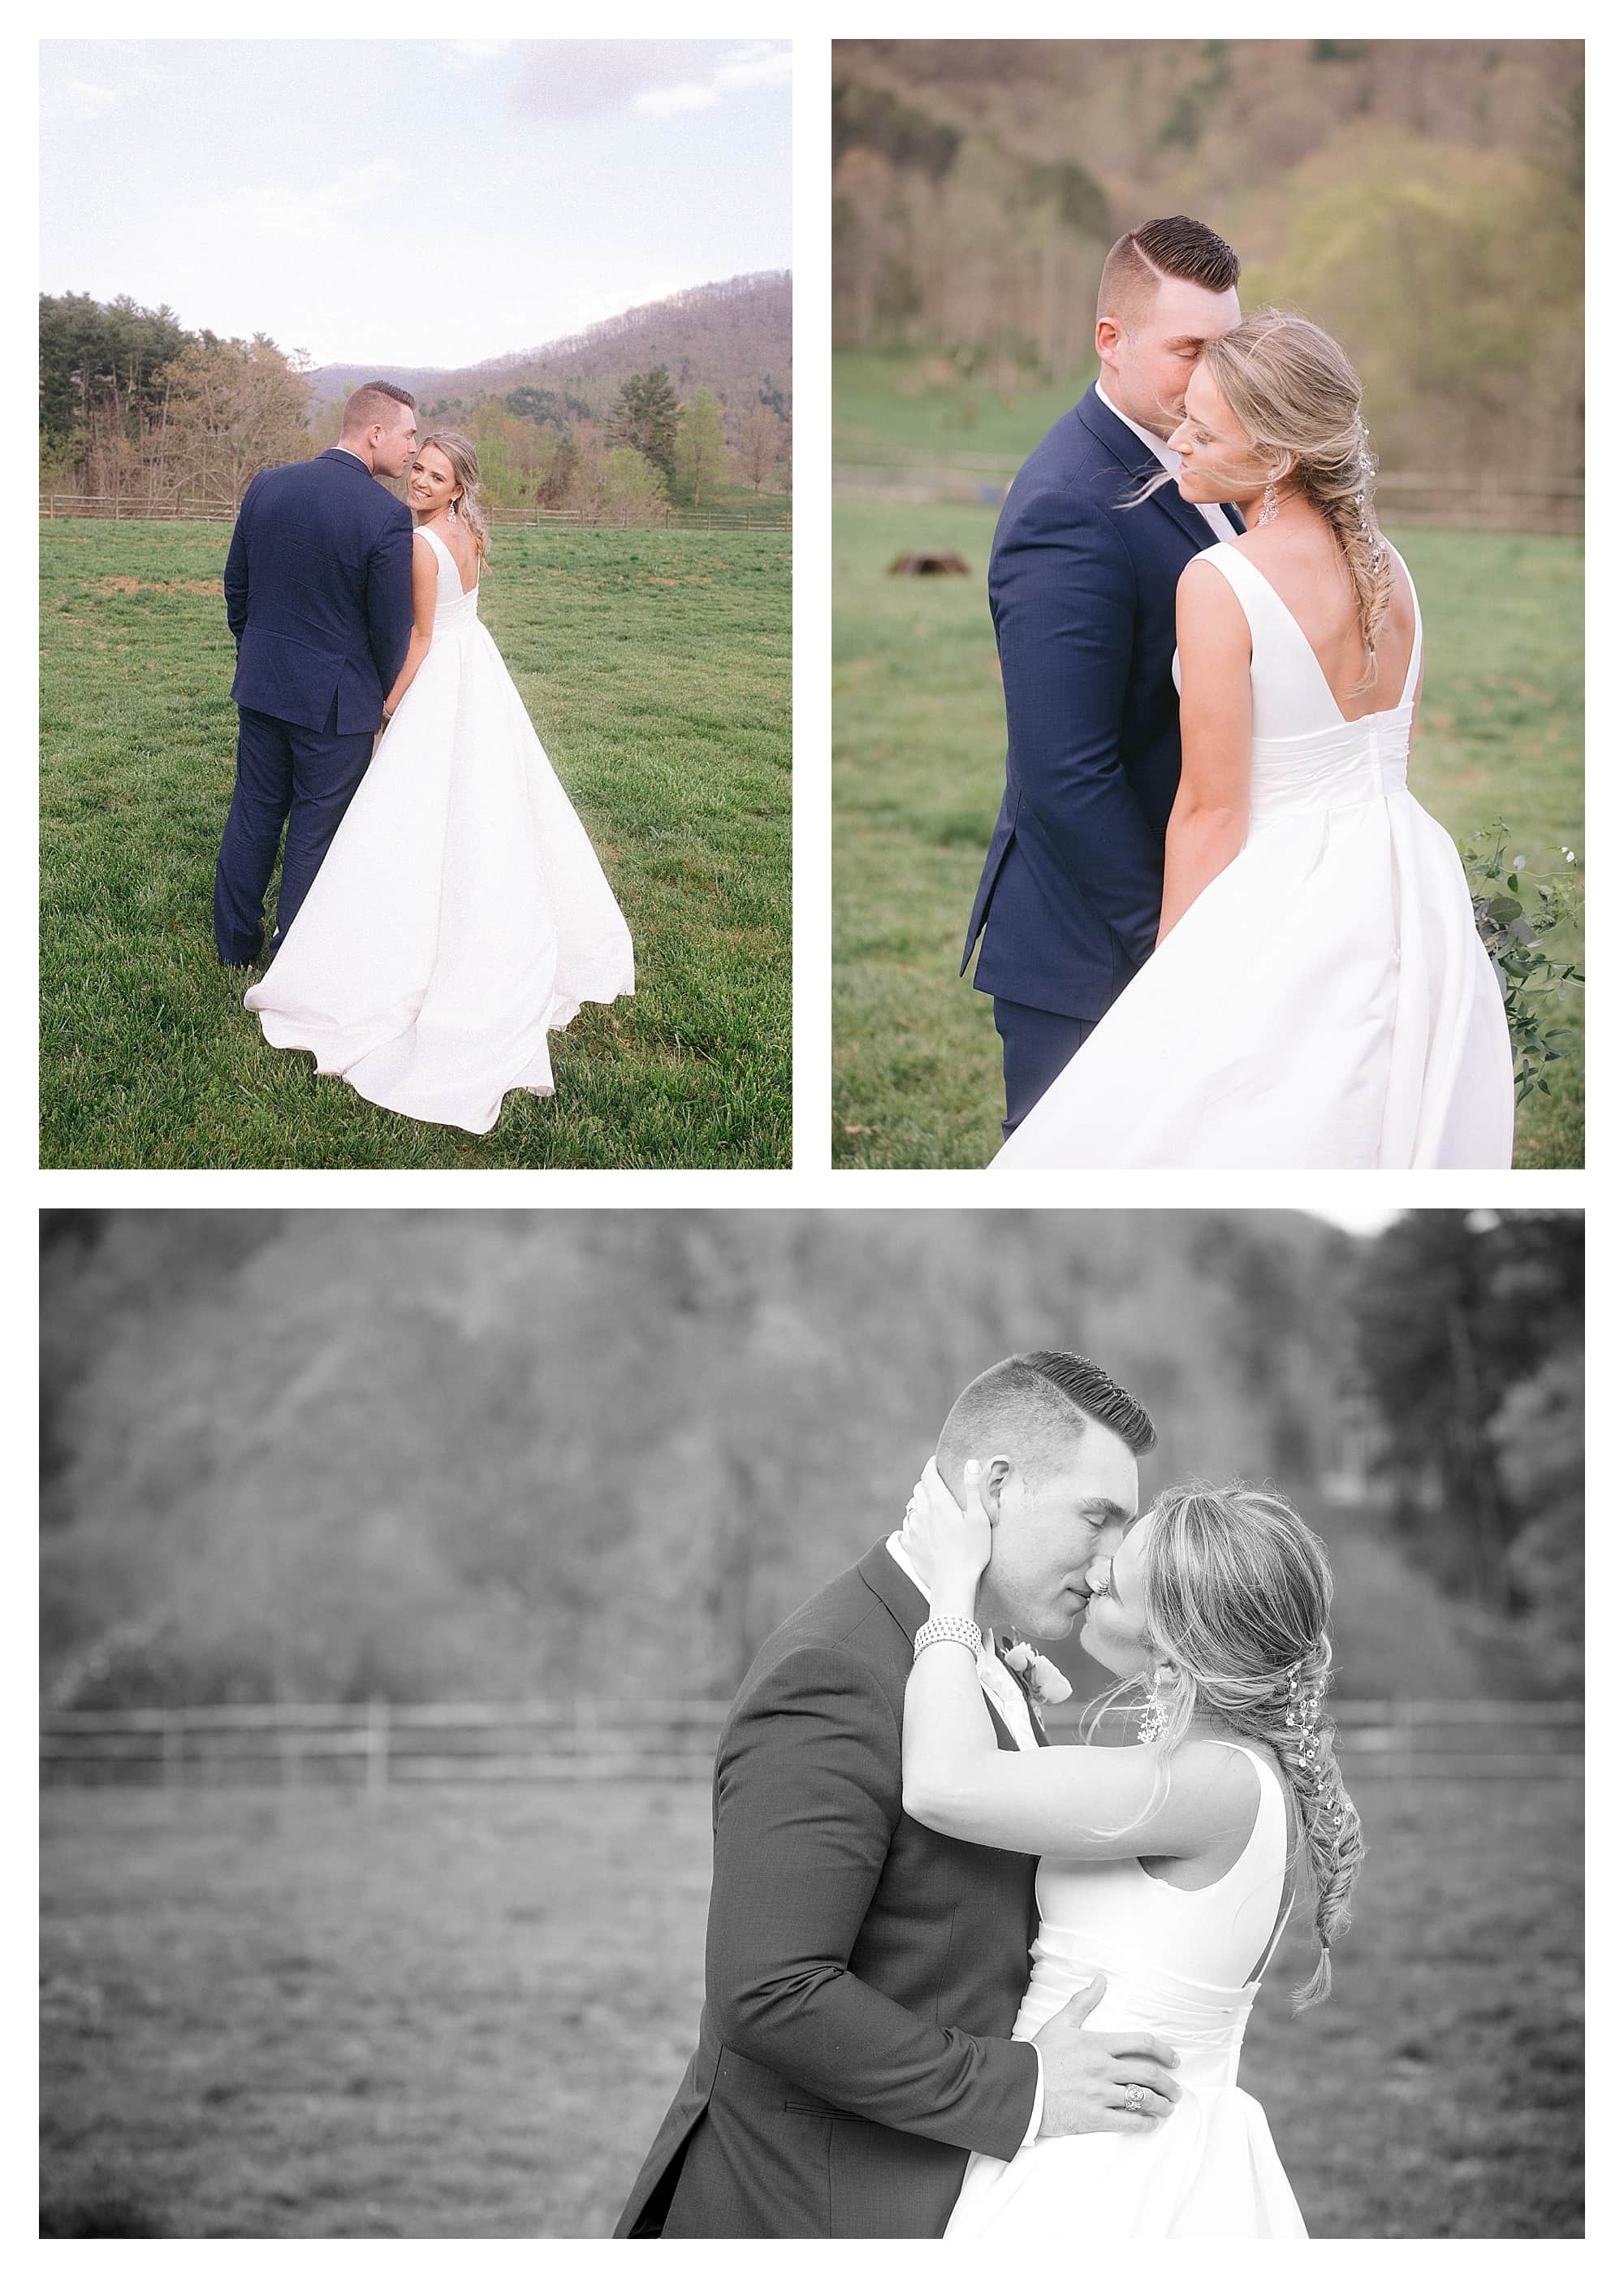 Bride and groom kissing in grassy field